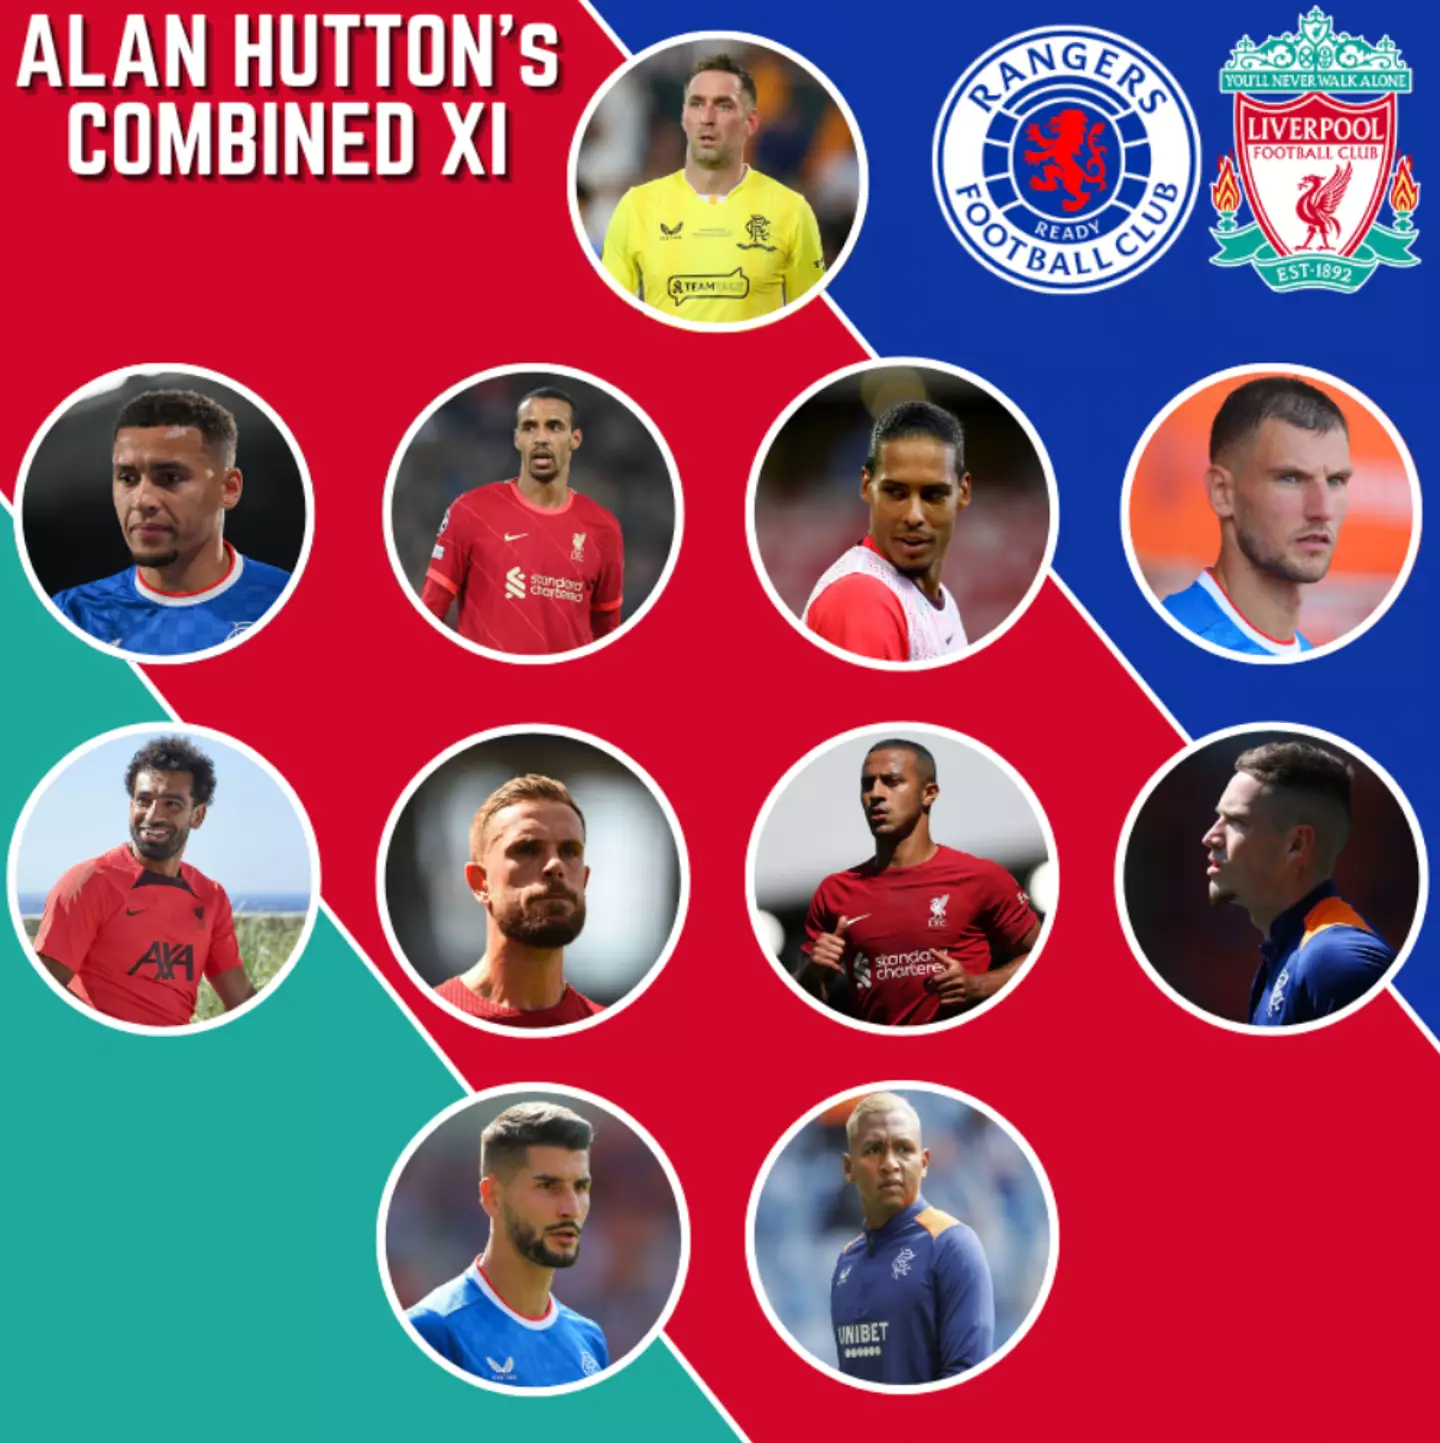 Hutton's combined XI.